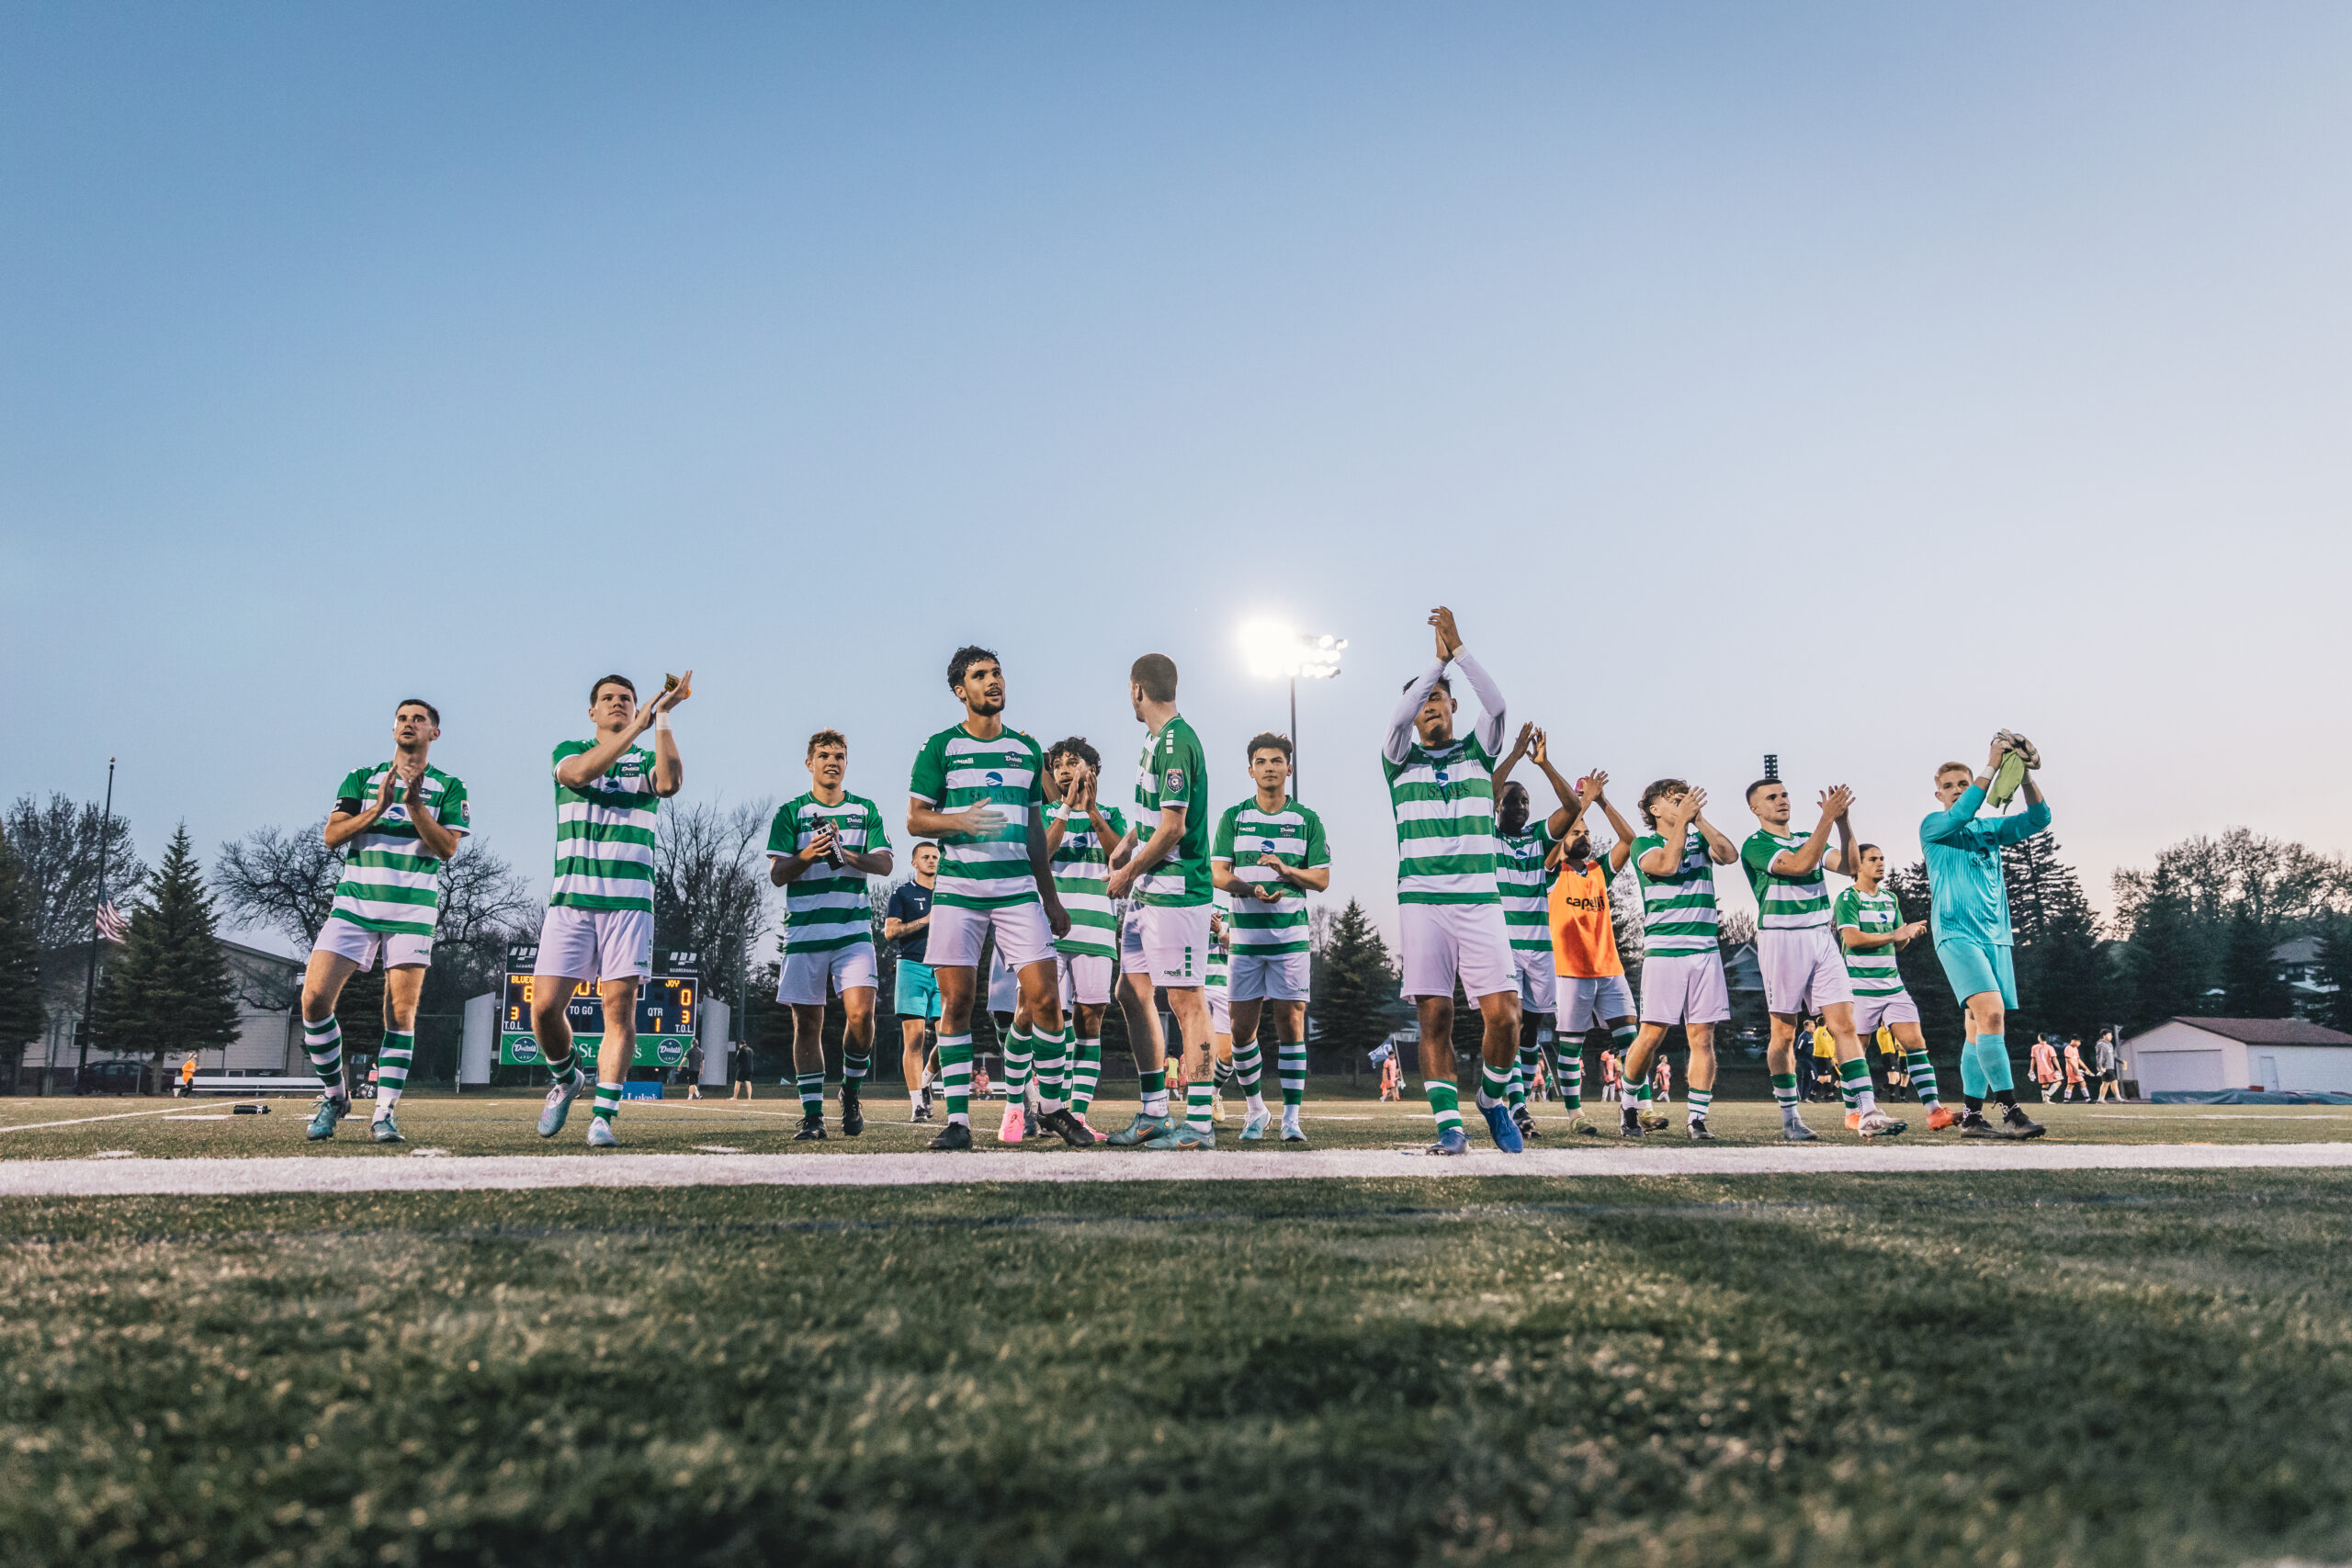 Soccer players in green and white hooped jerseys and white shorts celebrate